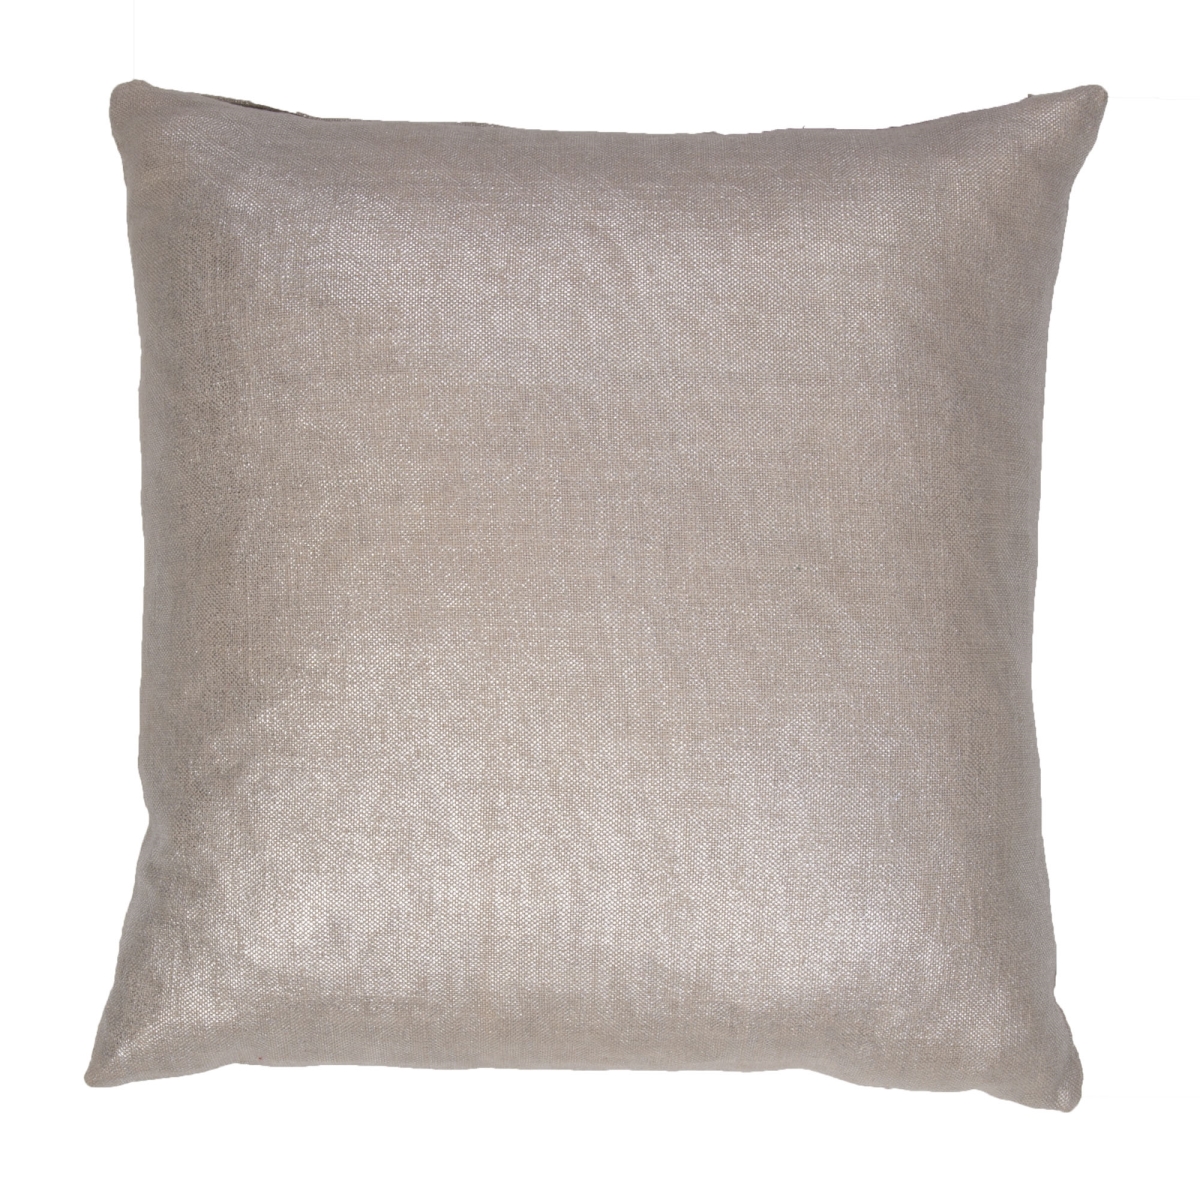 Plw102079 18 X 18 In. Shimmer Pillow Glitter Silver & Gray Solid Down Throw Pillow